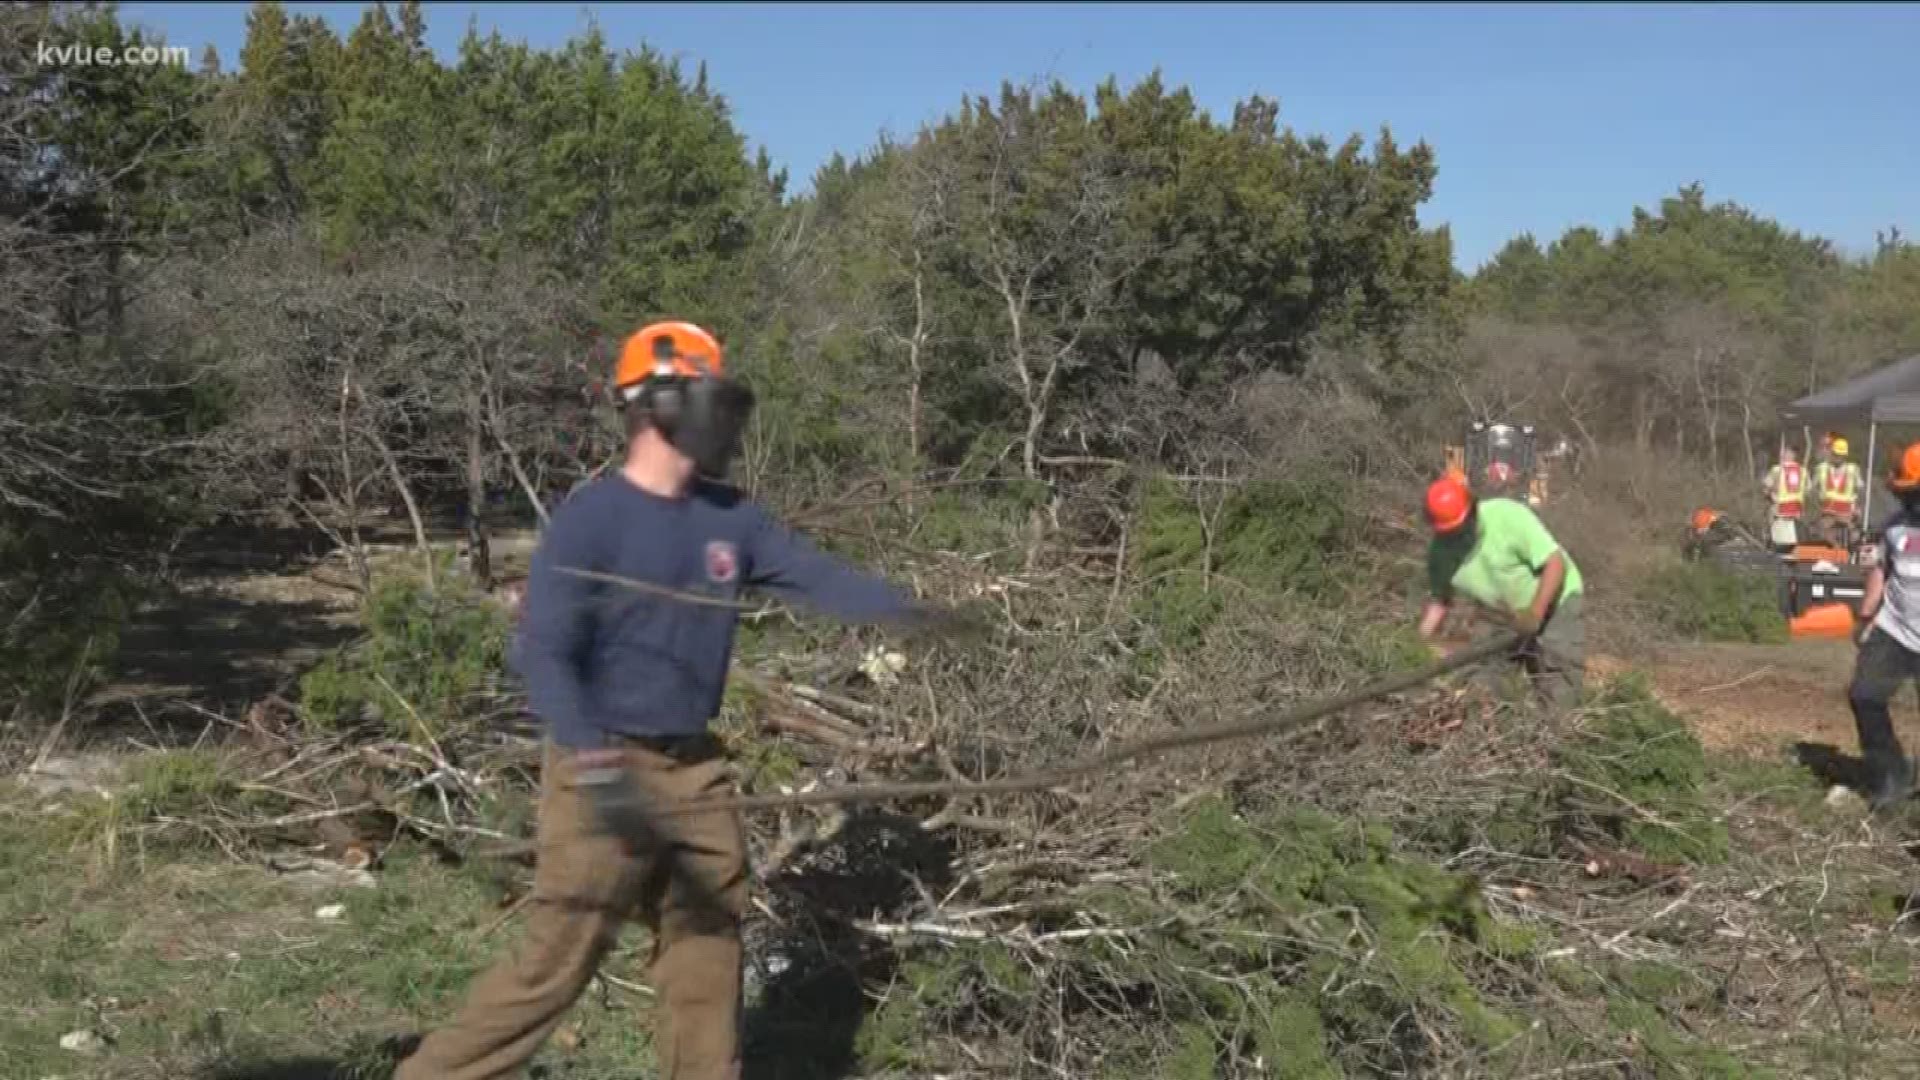 Williamson County is getting pro-active clearing out dead trees and brush around homes this weekend to try and prevent wildfires.